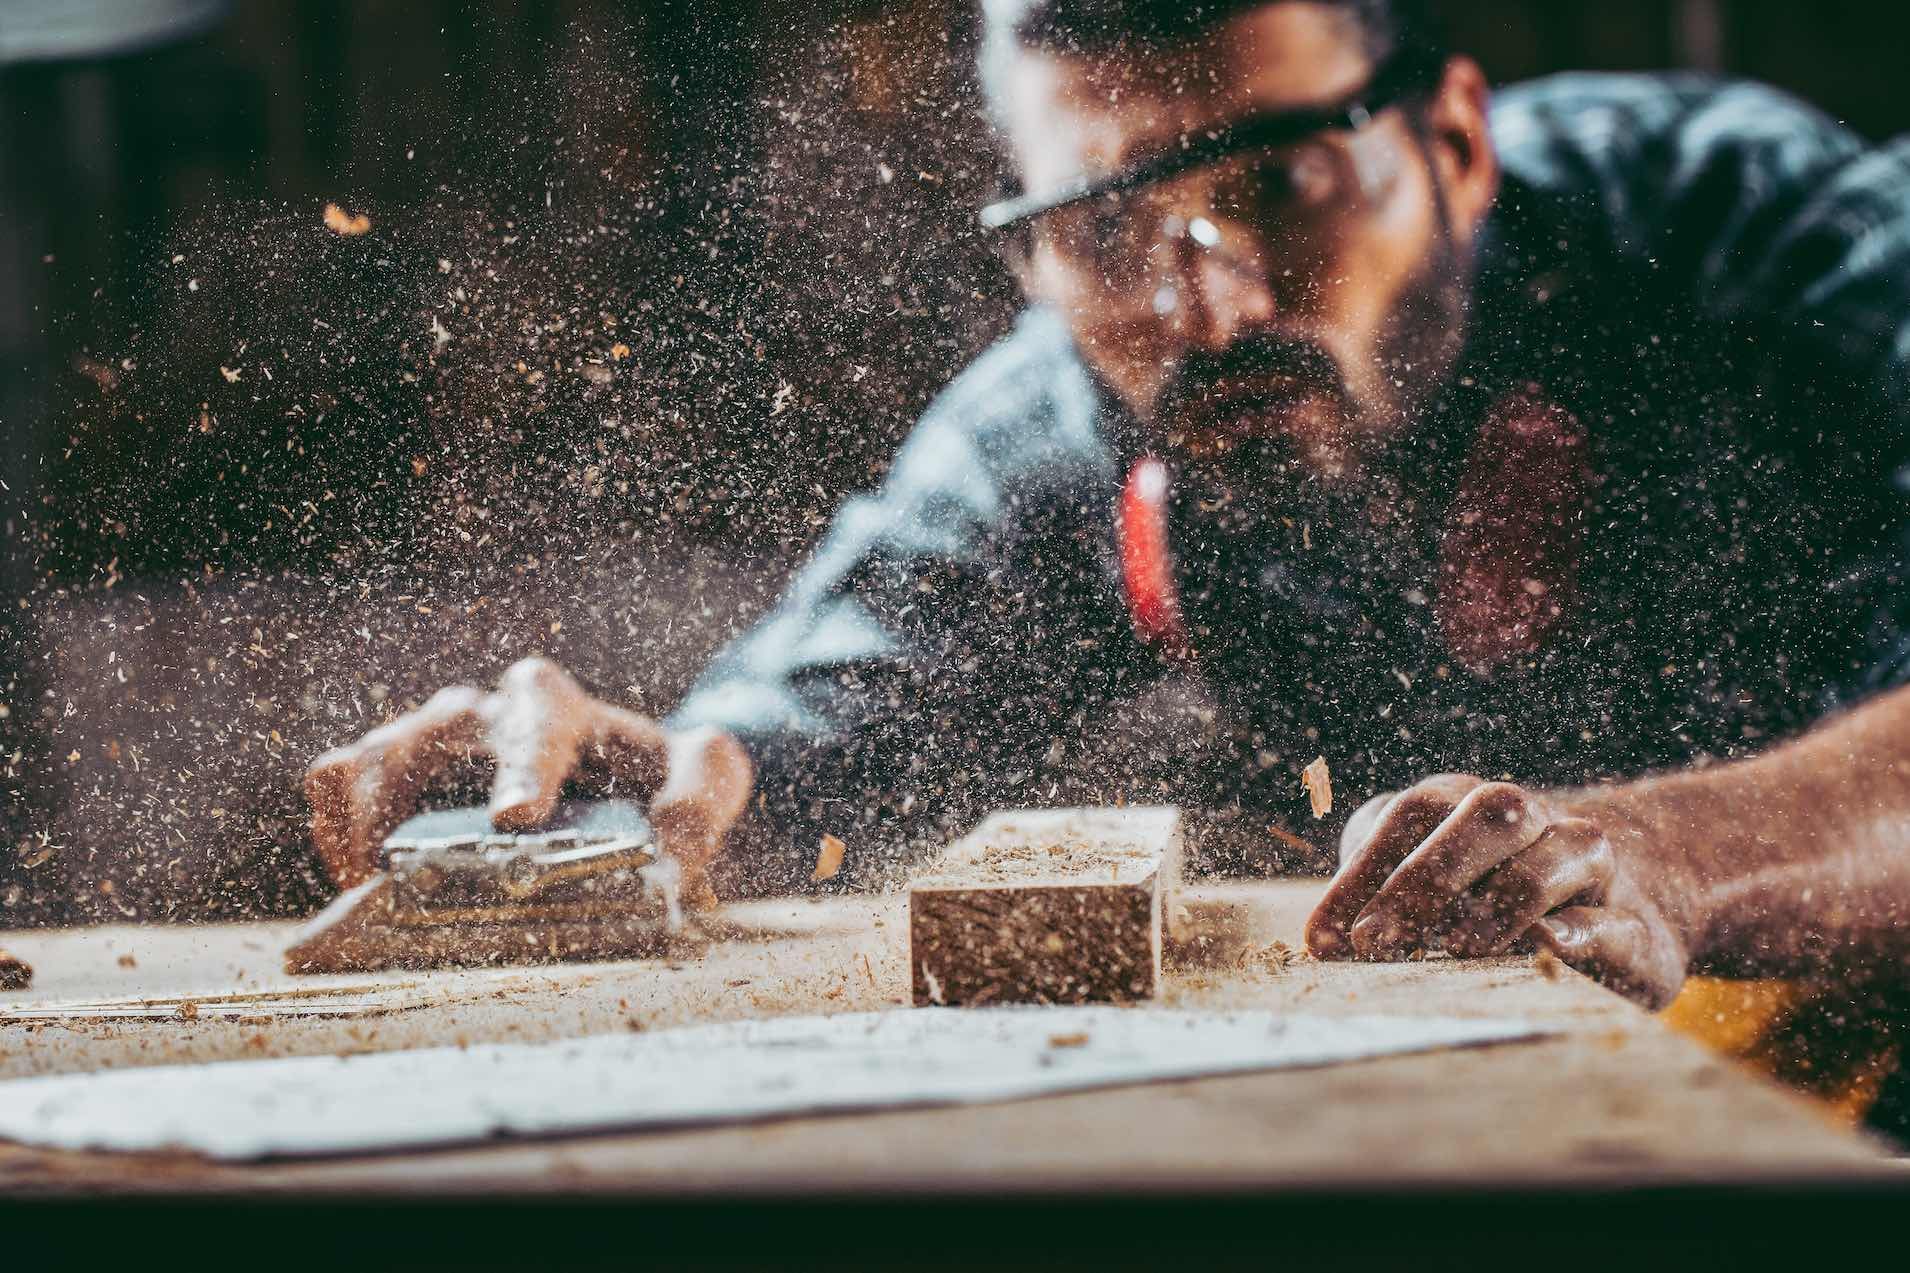 Man wearing goggles working in a wood shop sanding.